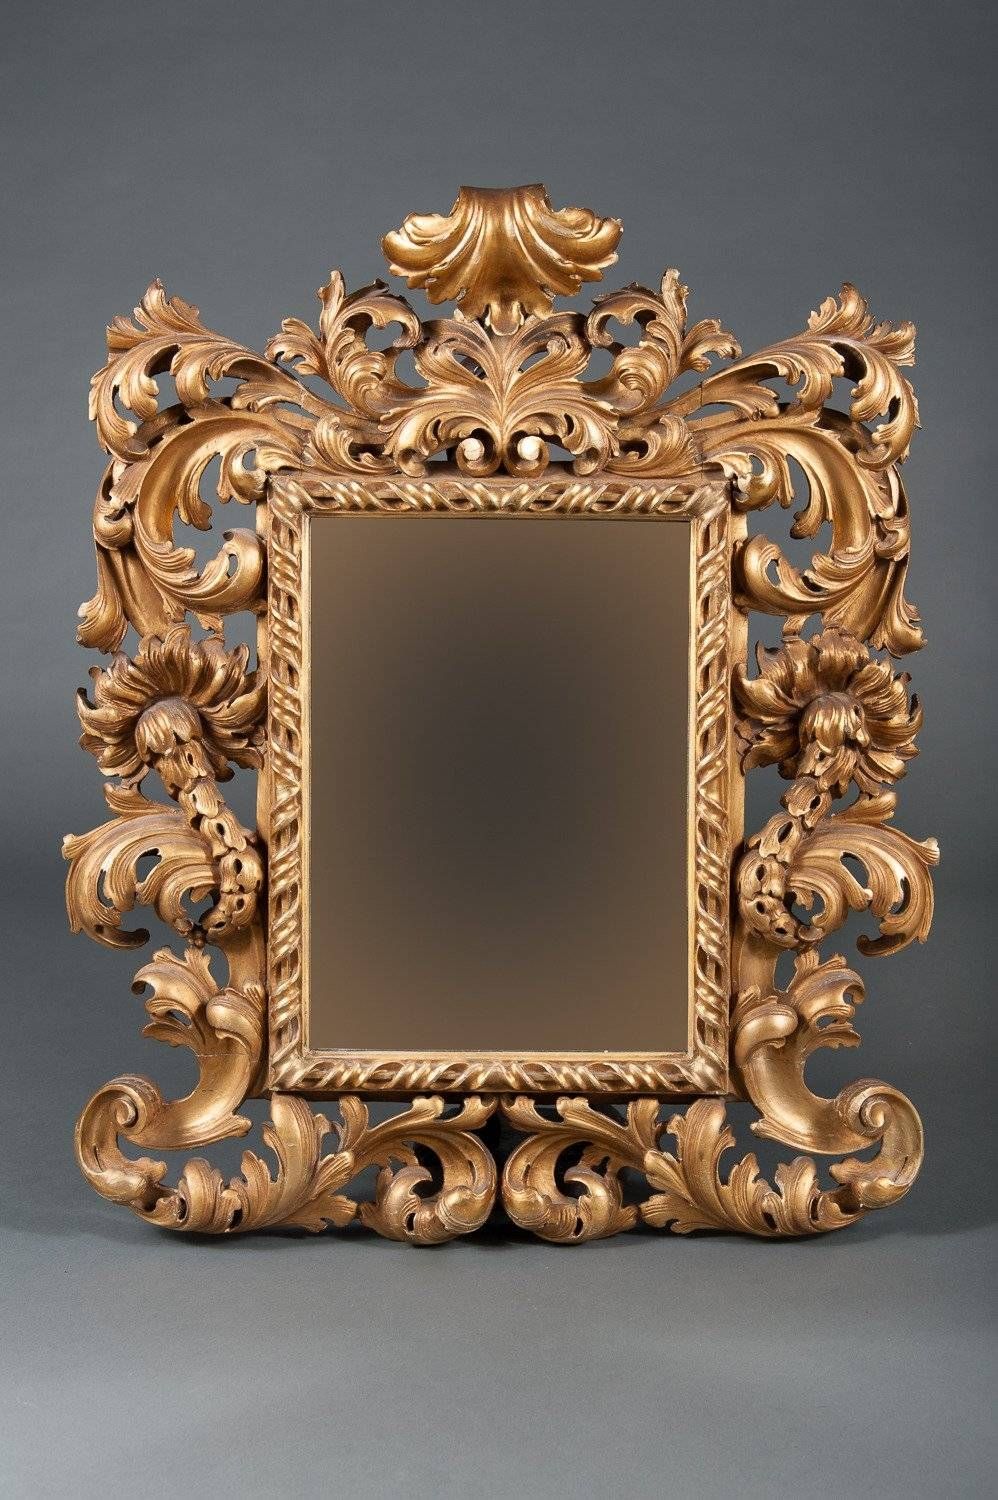 An Intricate 19th Century French Giltwood Rococo Style Vanity Or Intended For Rococo Wall Mirrors (View 11 of 15)